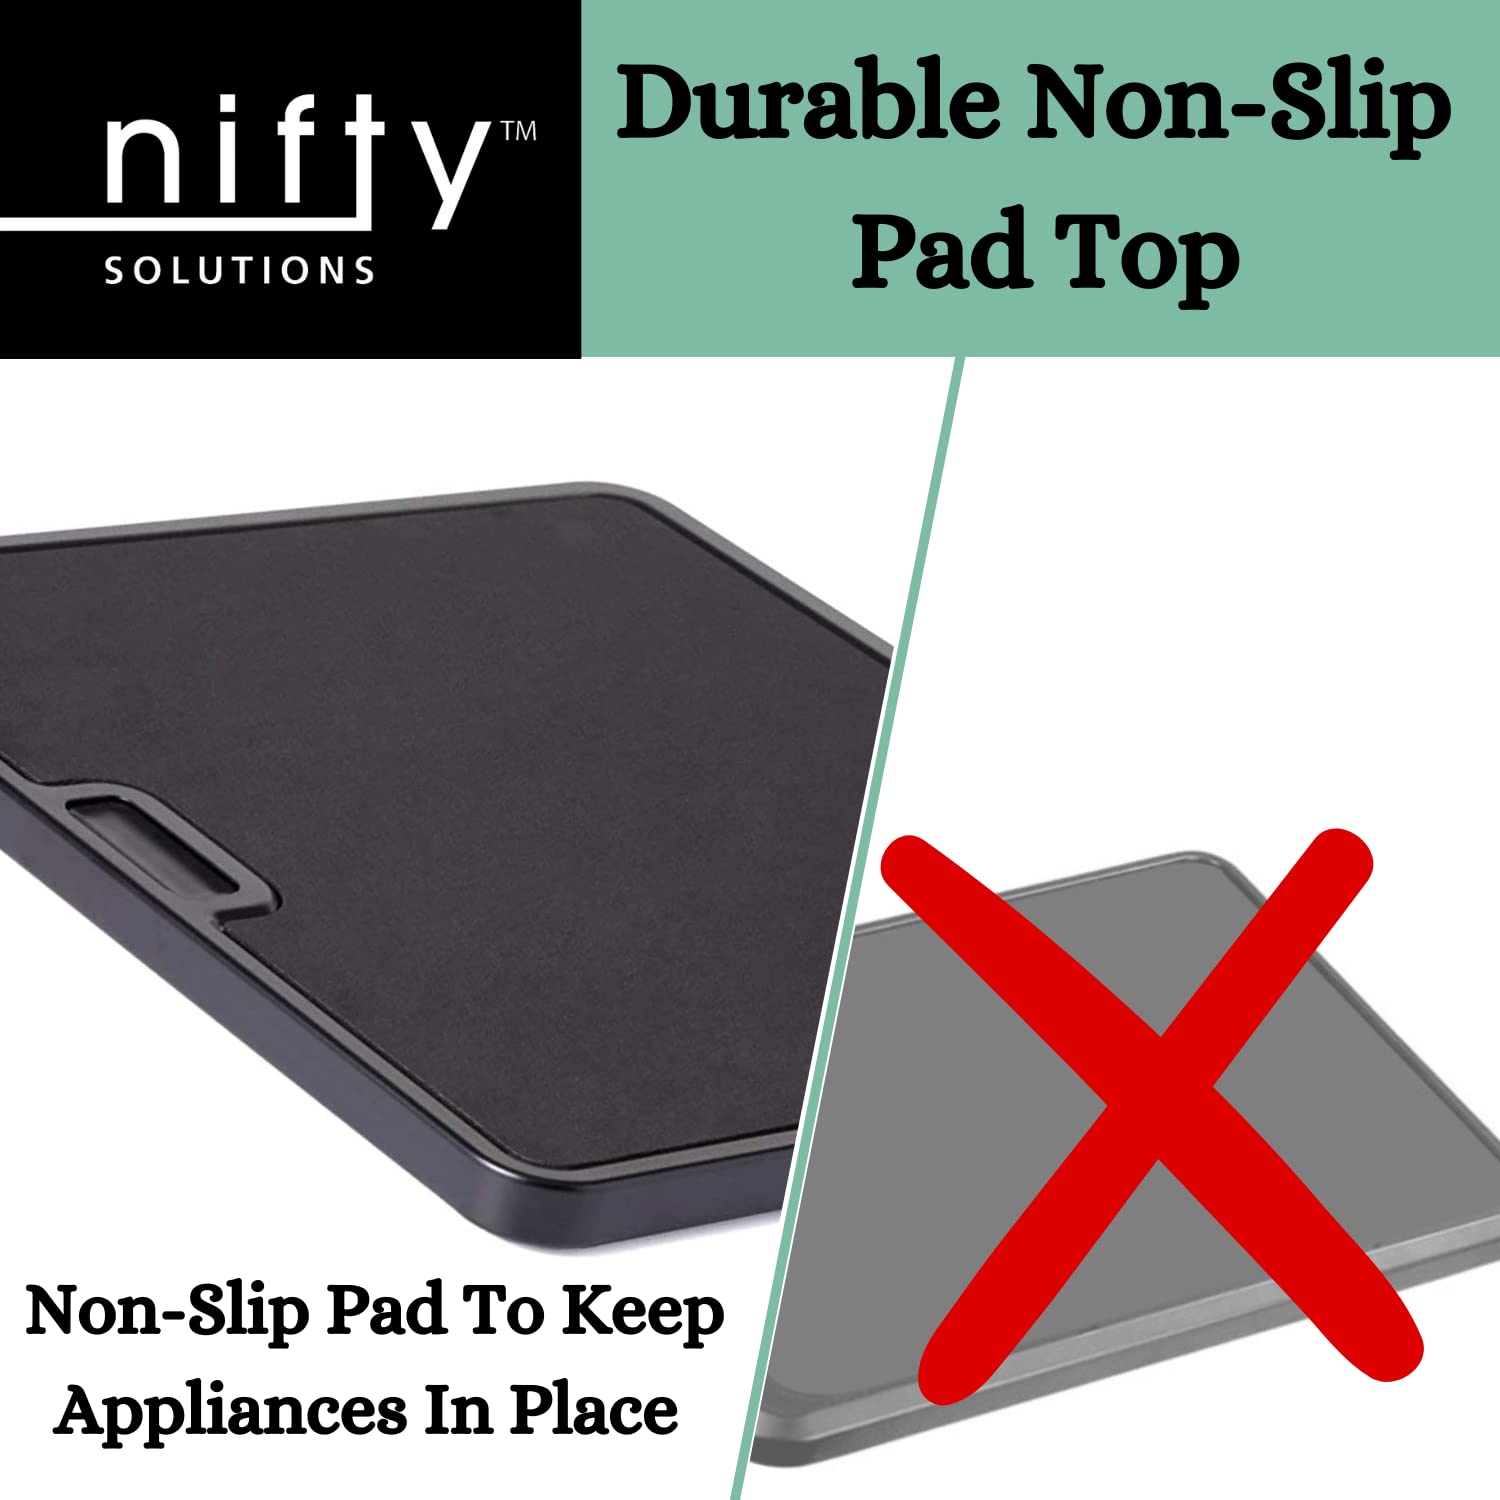 Nifty Small & Large Appliance Rolling Tray - Silver, Home Kitchen Counter Organizer, Integrated Rolling System, Non-Slip Pad Top for Coffee Maker, Stand Mixer, Blender, Toaster